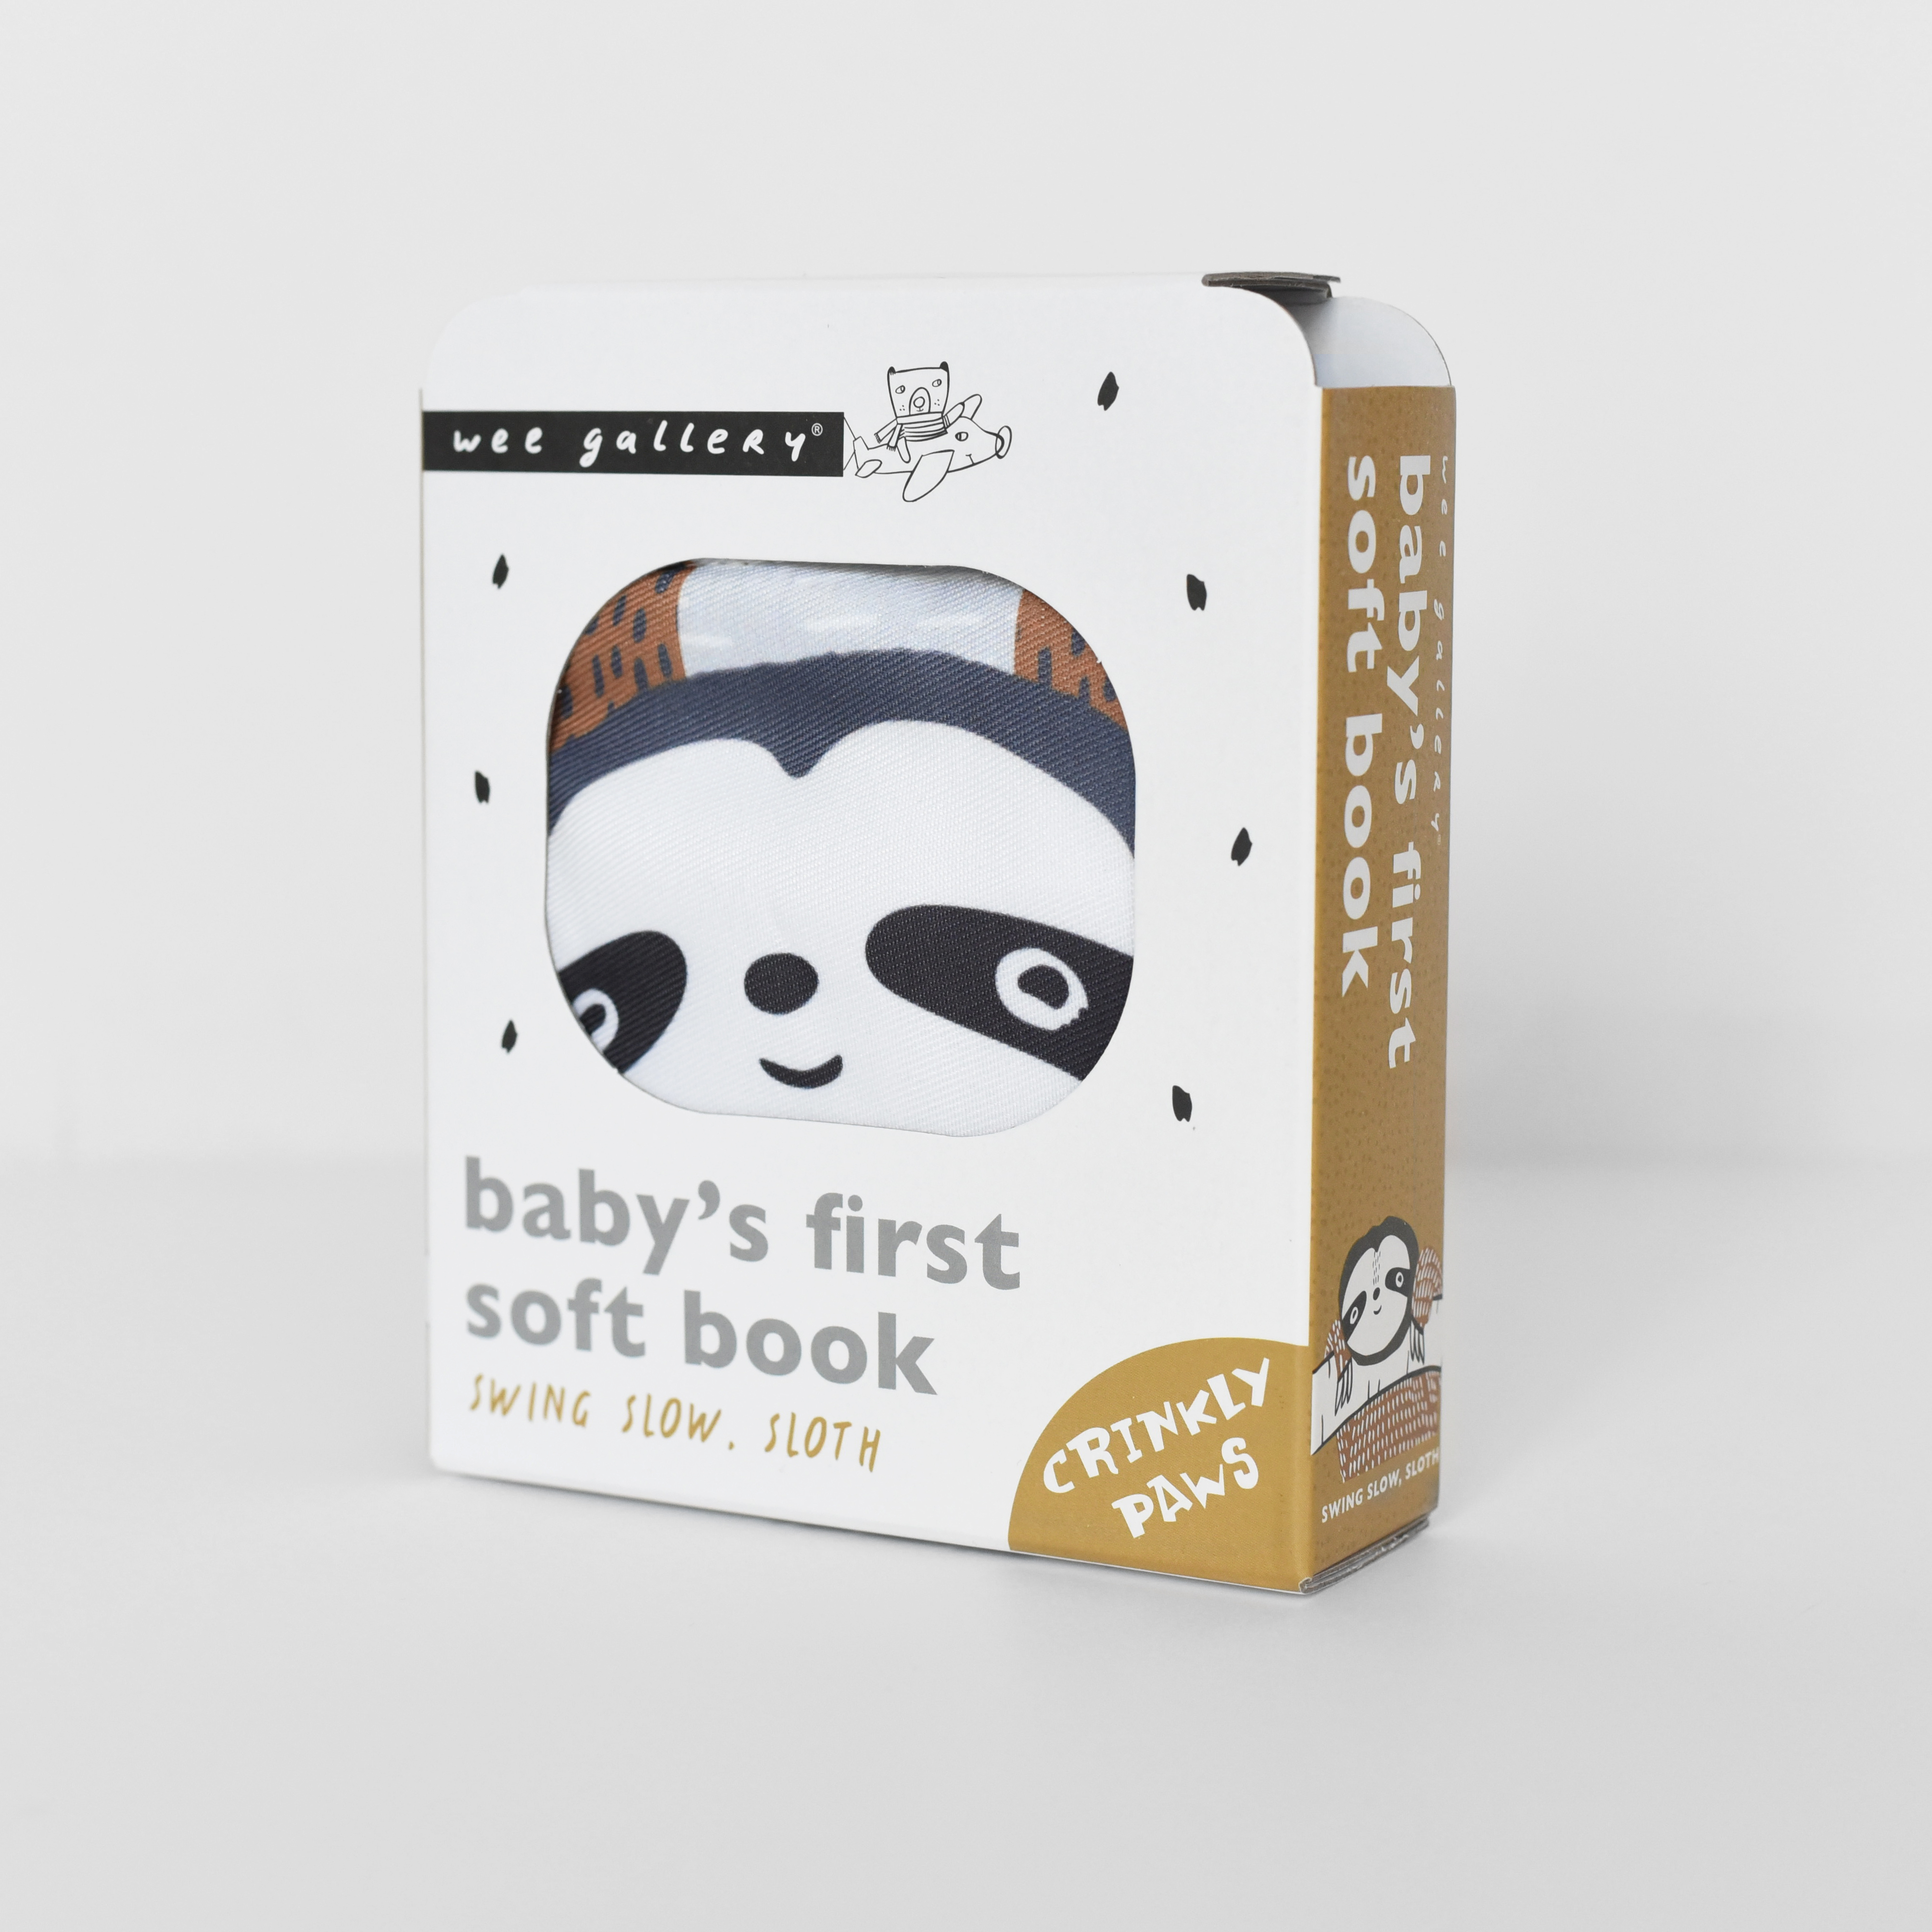 Wee Gallery Soft Cloth Book - Swing Slow Sloth